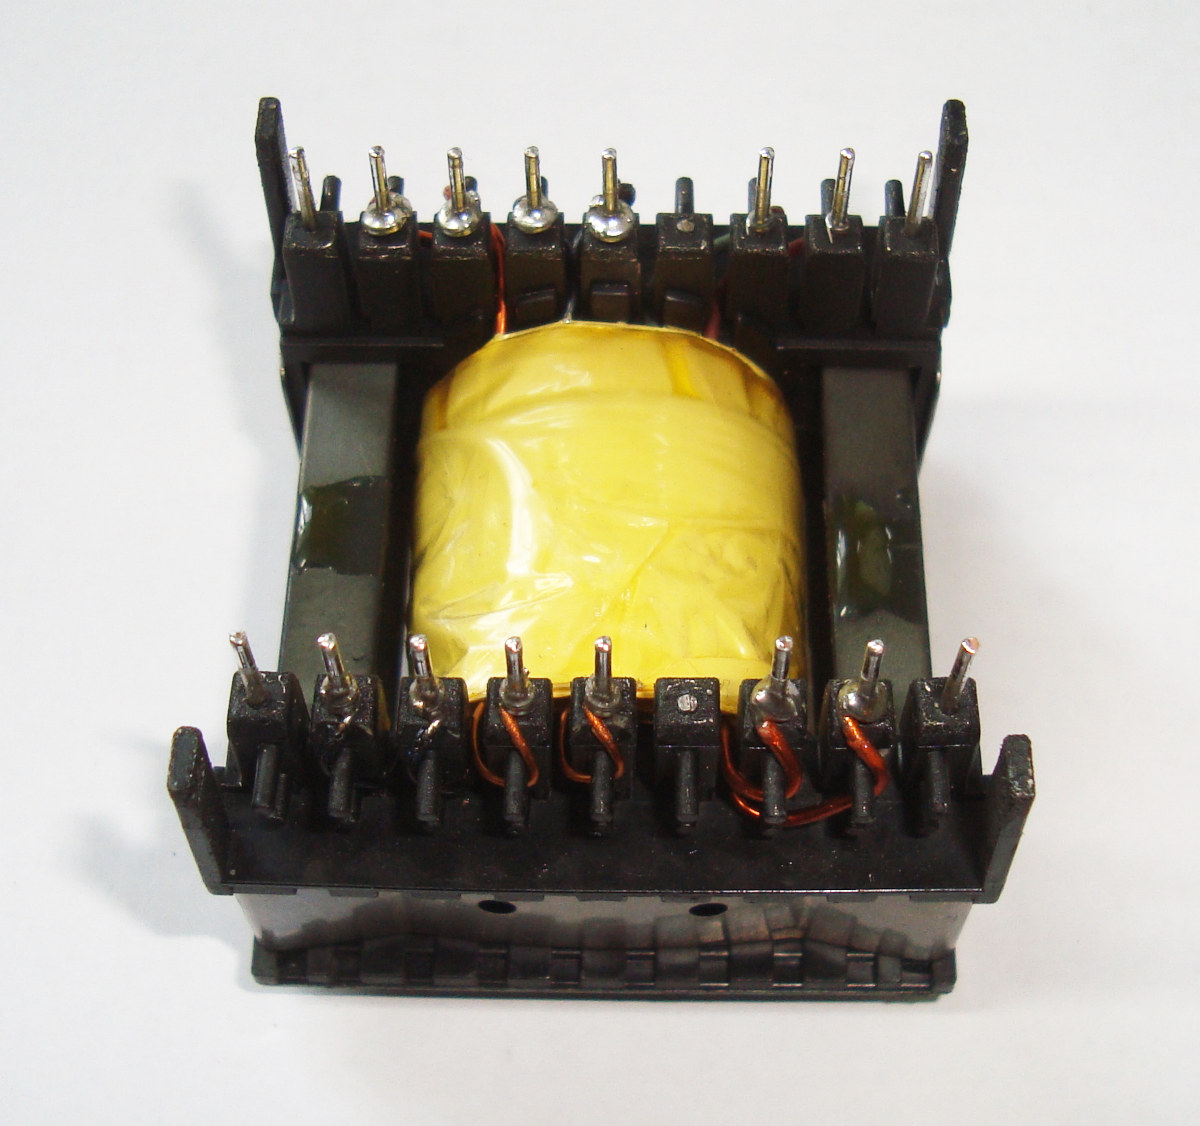 3 Vac Transformer Zkb634-048-54-120s-c1 From Germany